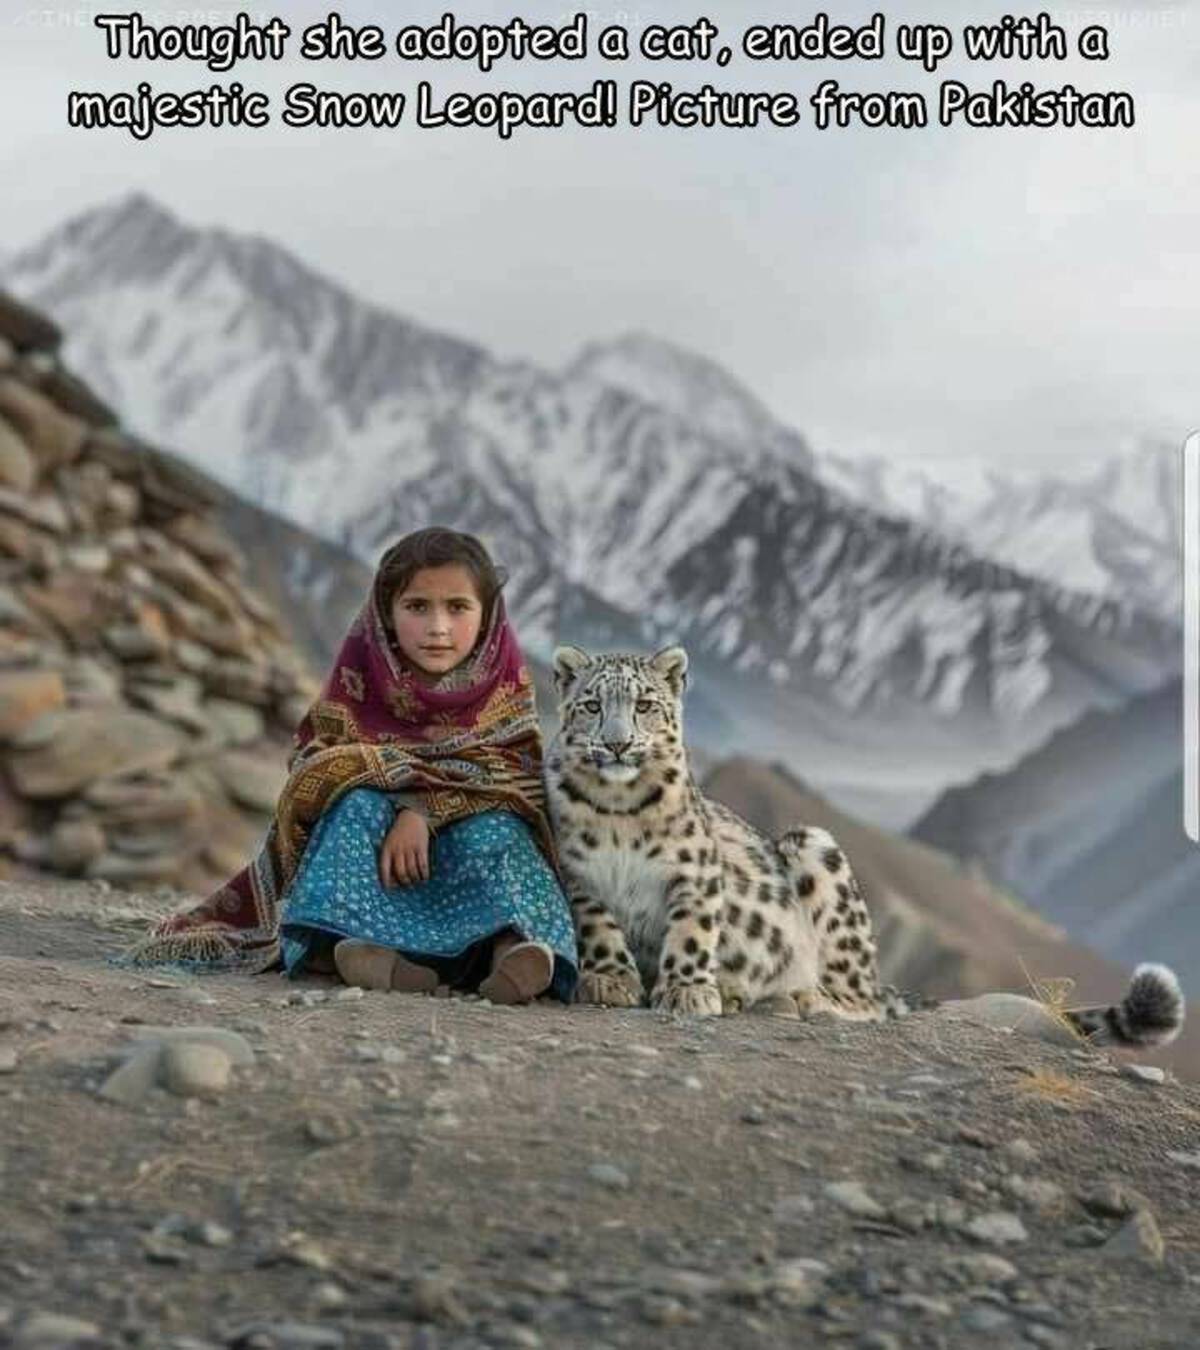 african leopard - Cine Thought she adopted a cat, ended up with a majestic Snow Leopard! Picture from Pakistan